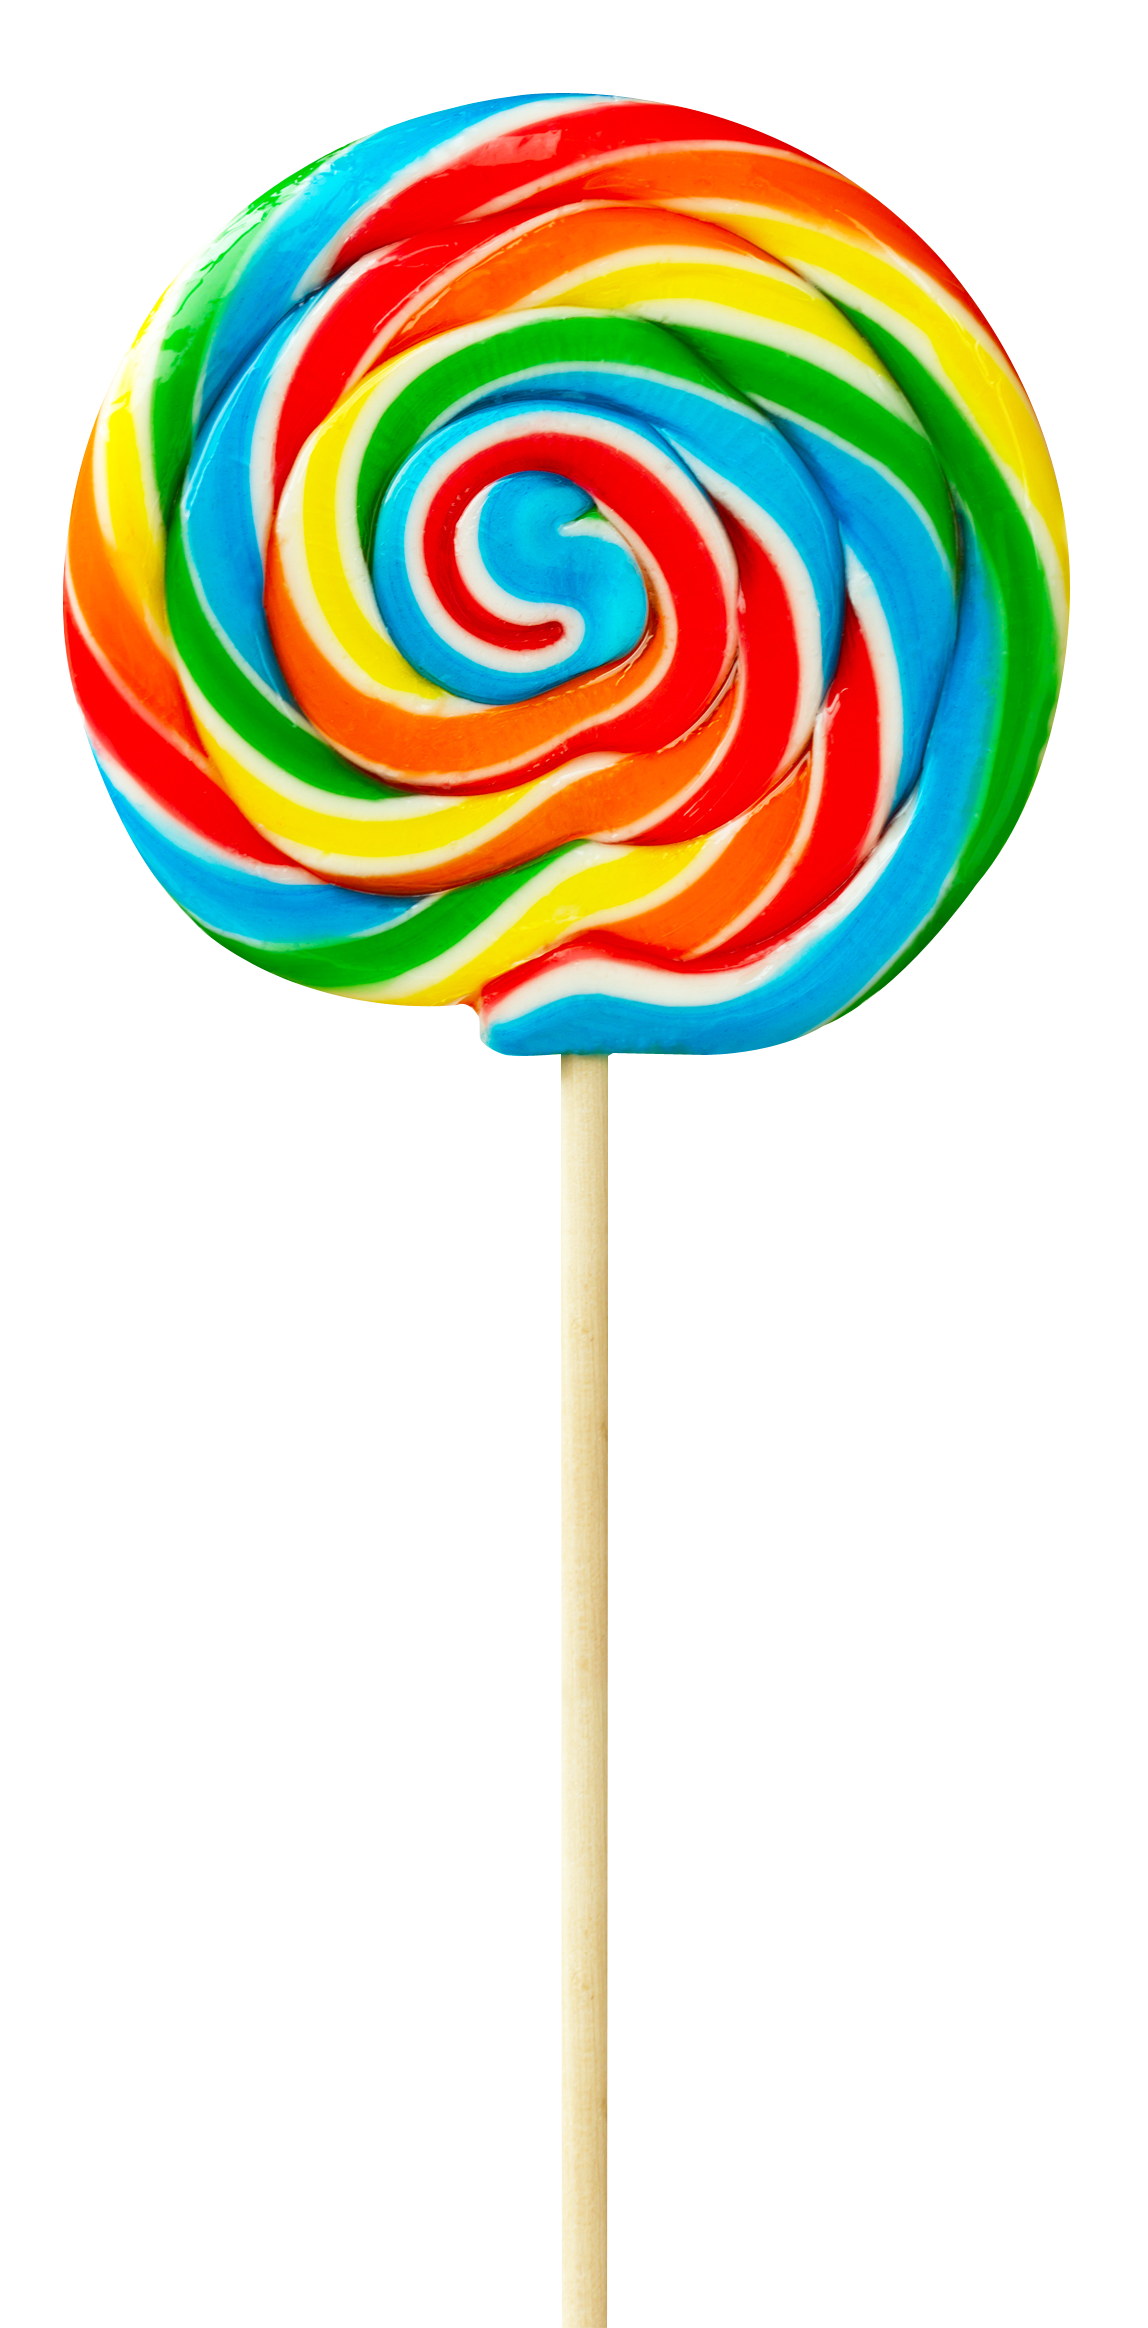 Android-5.0-Lollipop